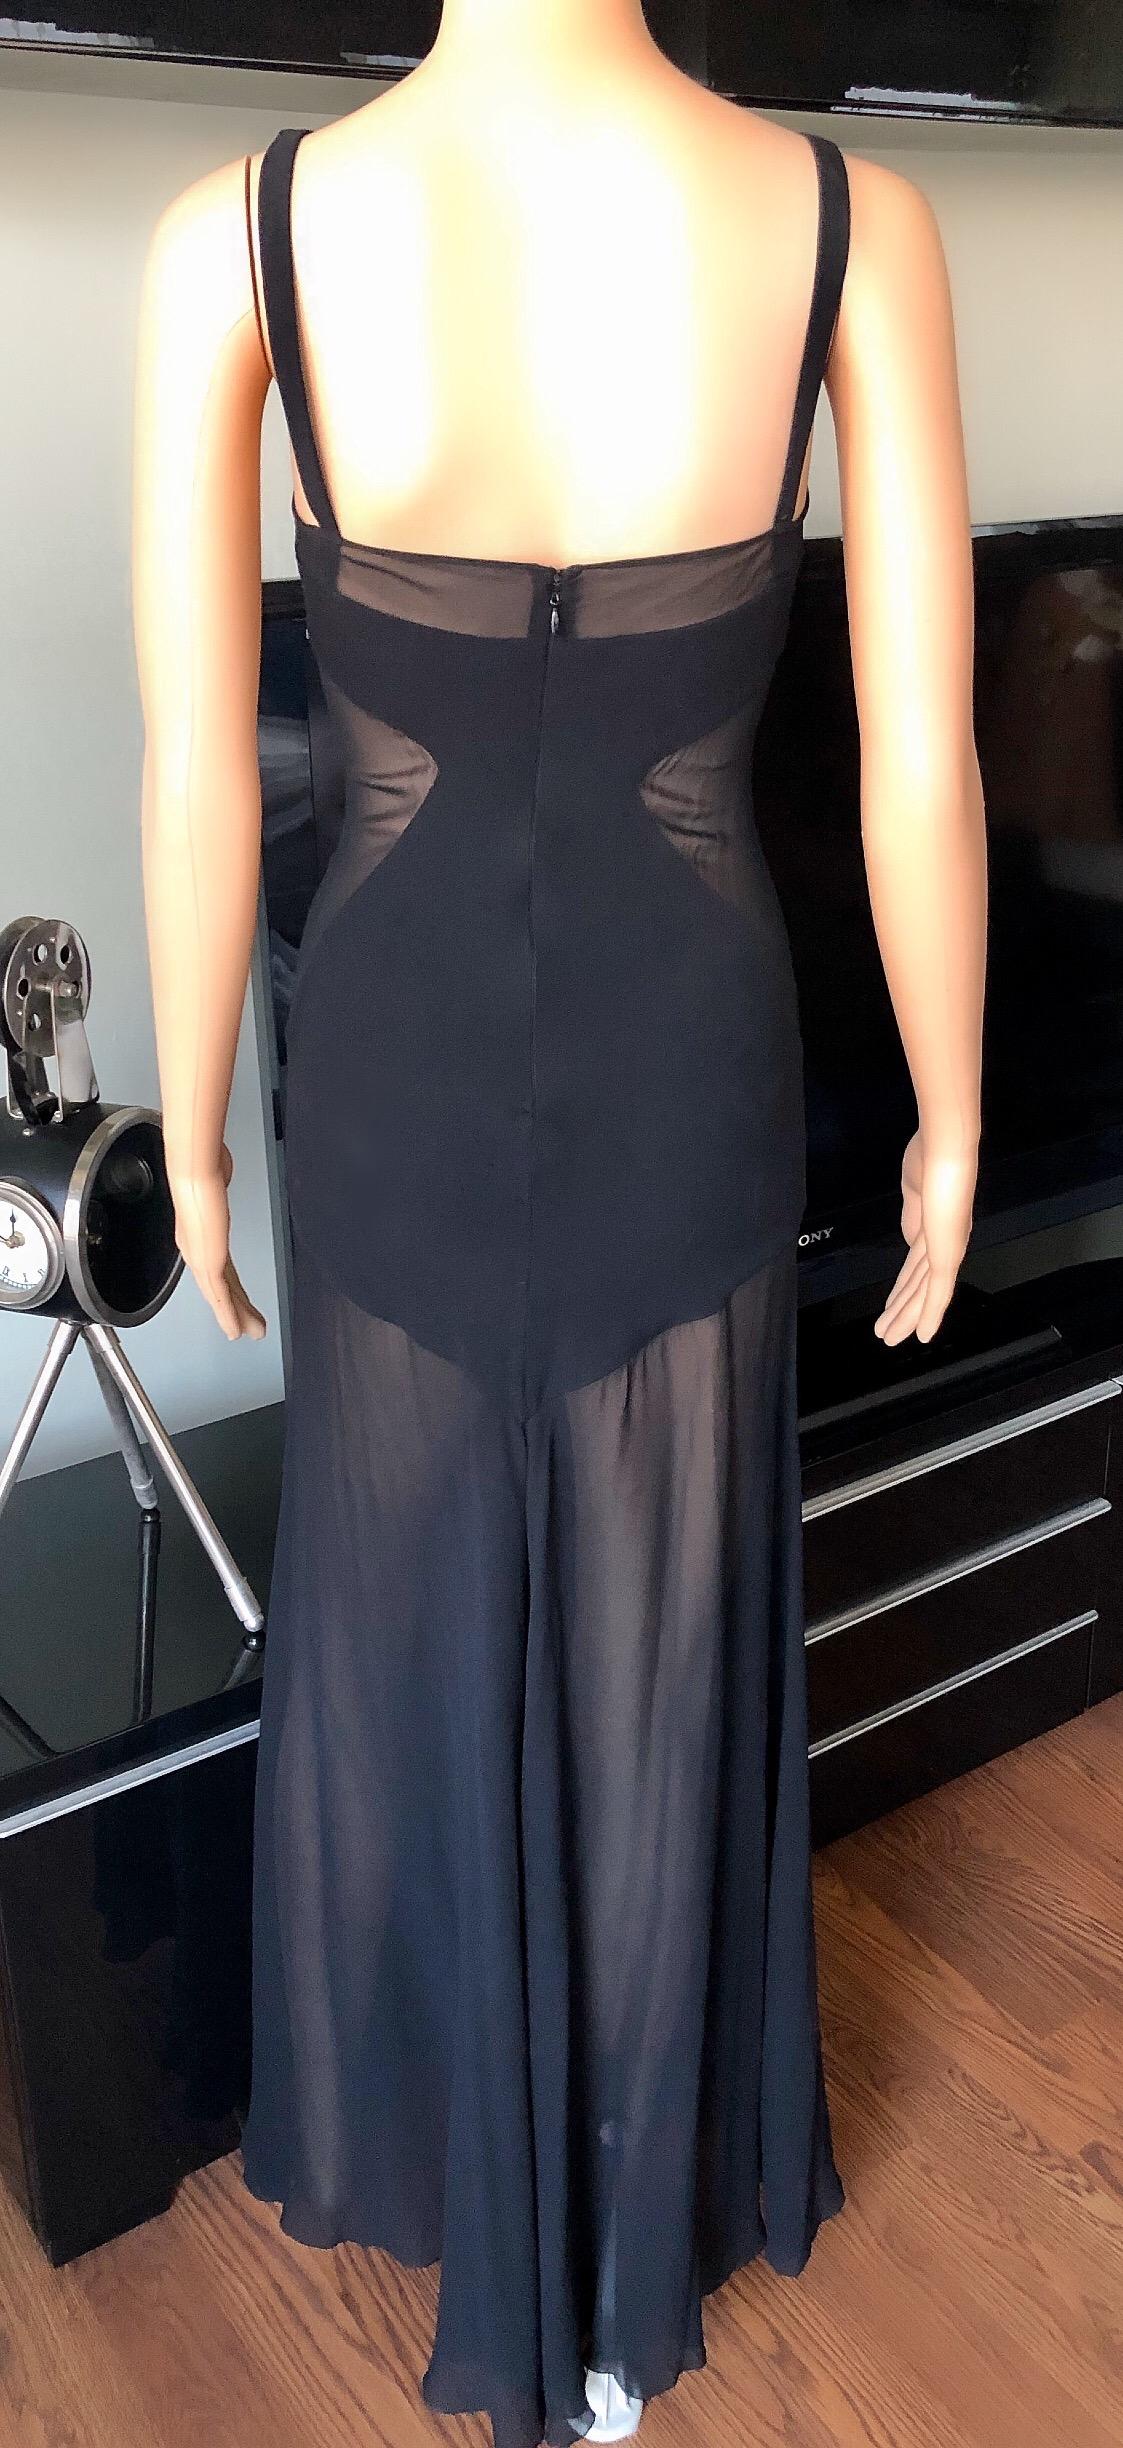 Gianni Versace S/S 1995 Vintage Sheer Panels Silk Black Gown Evening Dress In Good Condition For Sale In Naples, FL